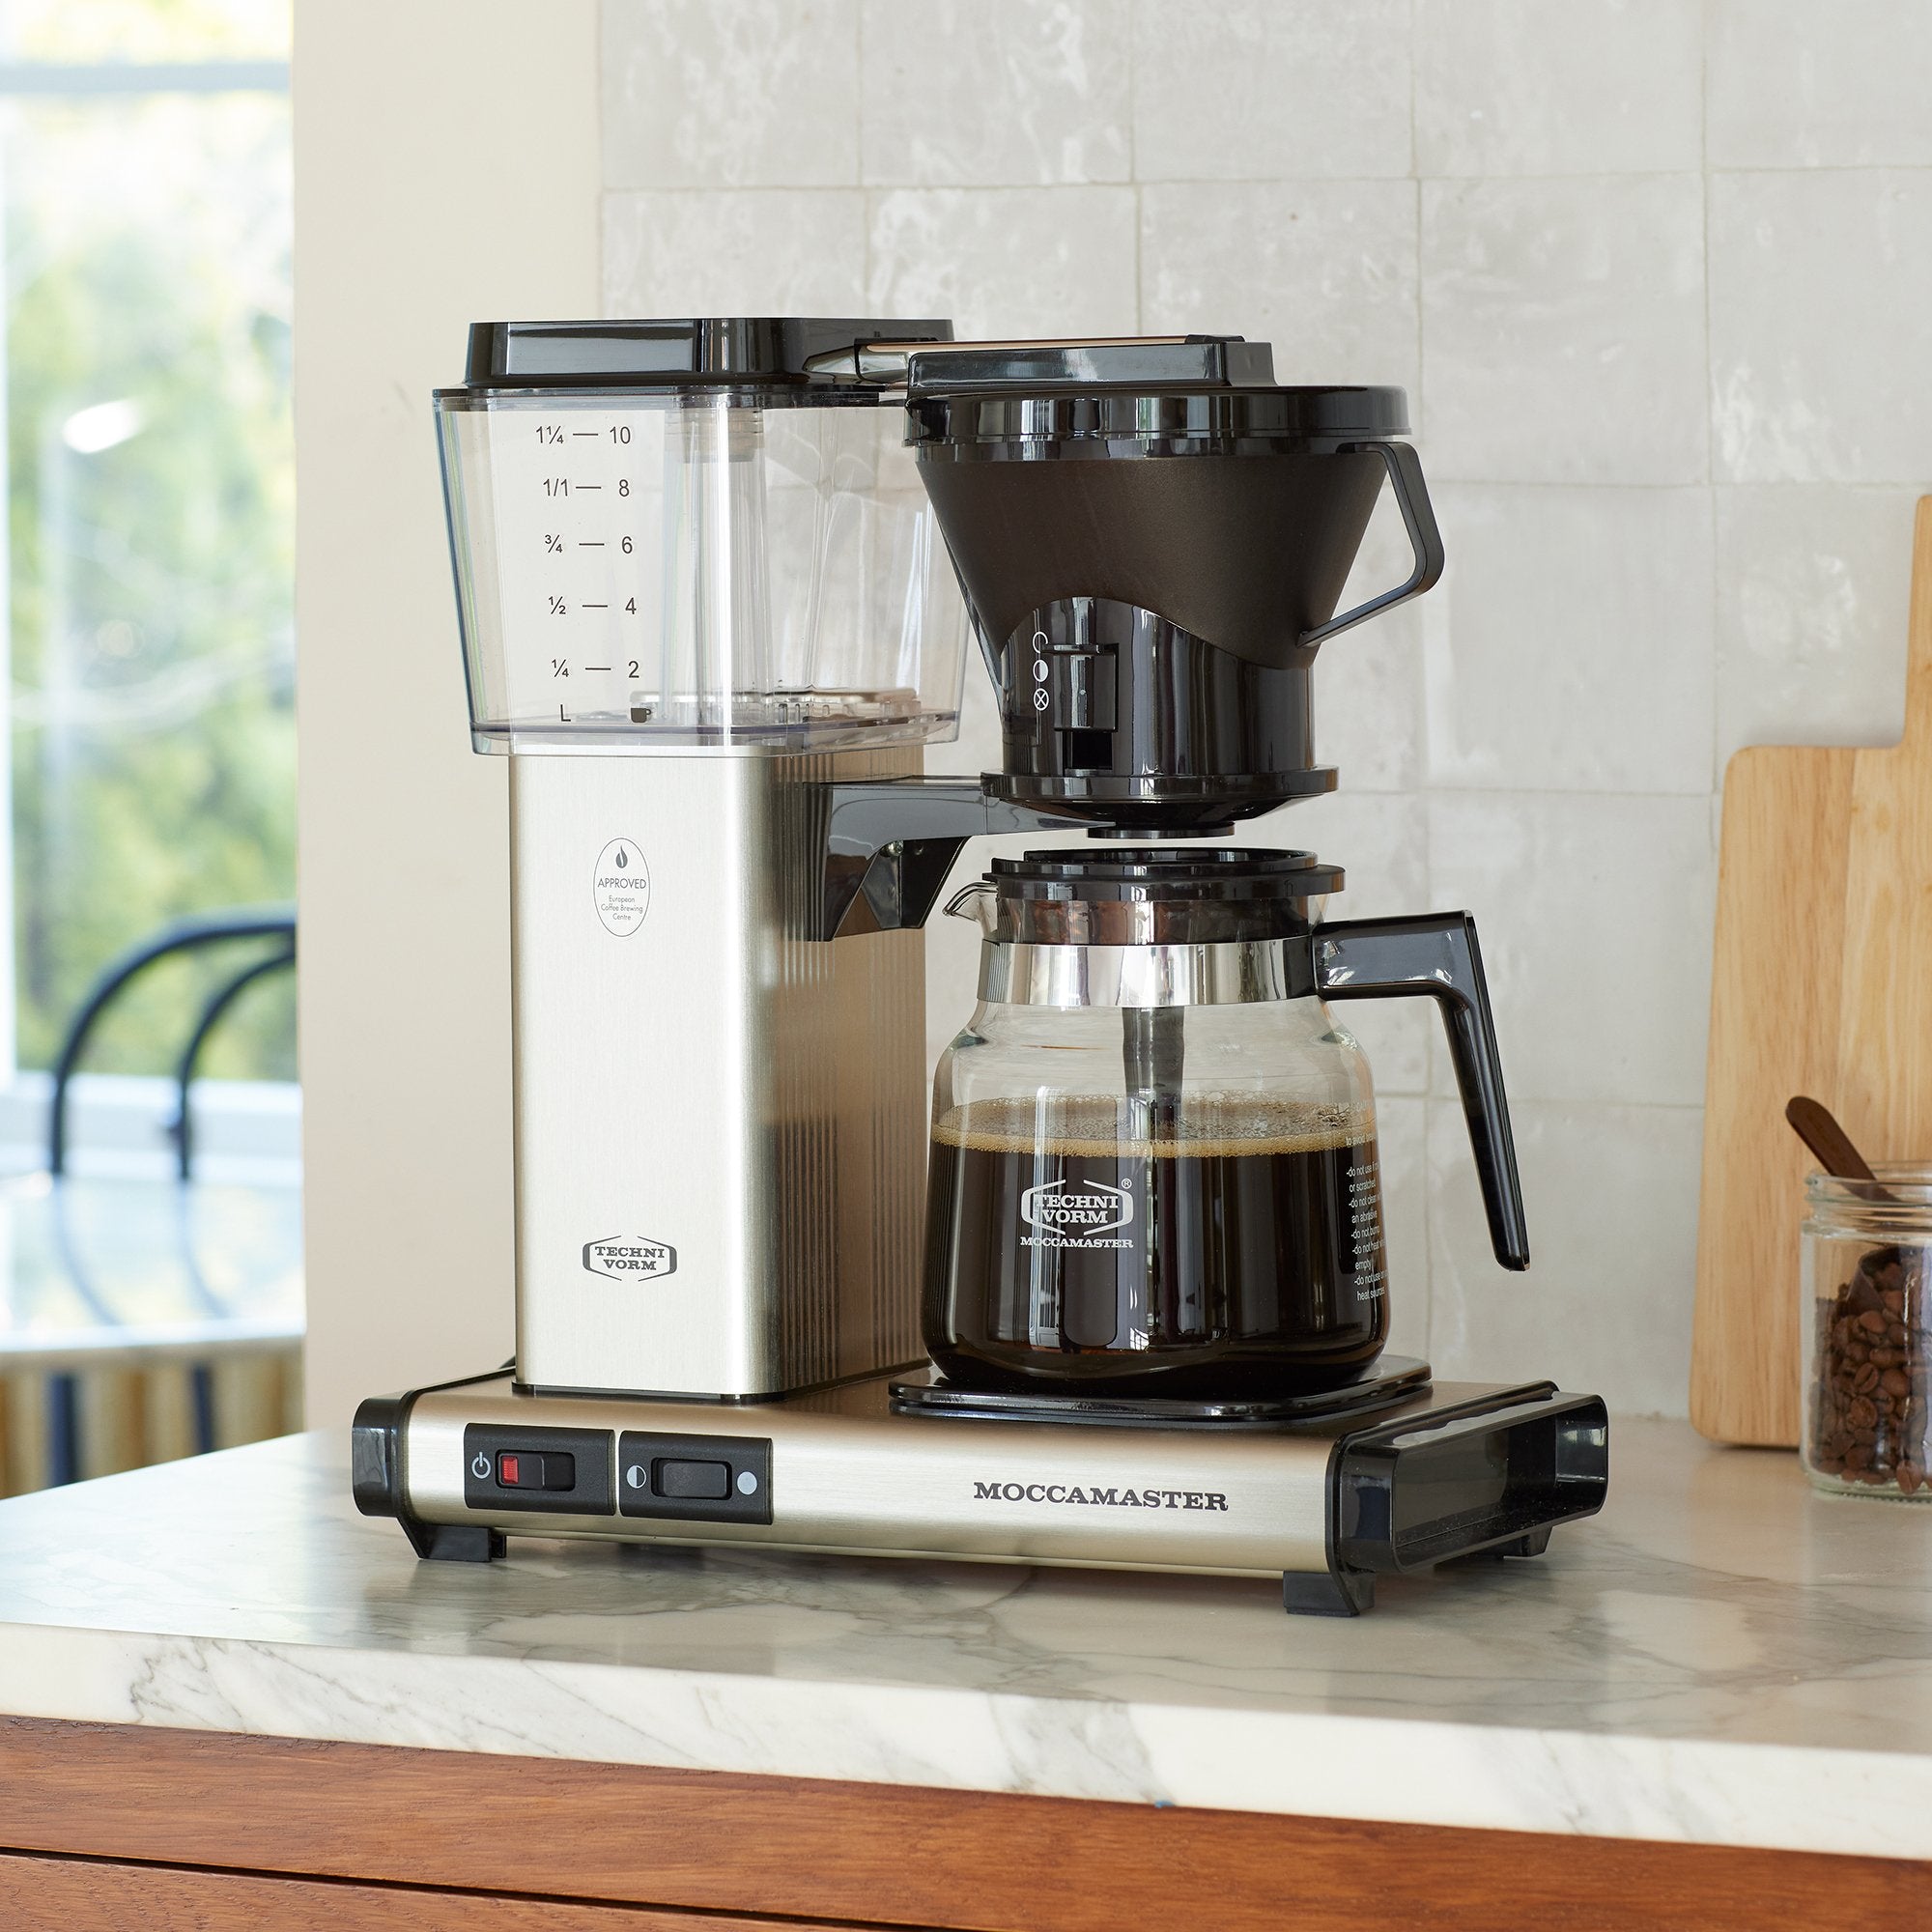 Moccamaster KB in Brushed Silver -Front shot showing rectangular tower and base, clear acrylic water reservoir with fill level marks, power and hotplate level switches, glass carafe with plastic handle, and black brew basket with drip speed selector.